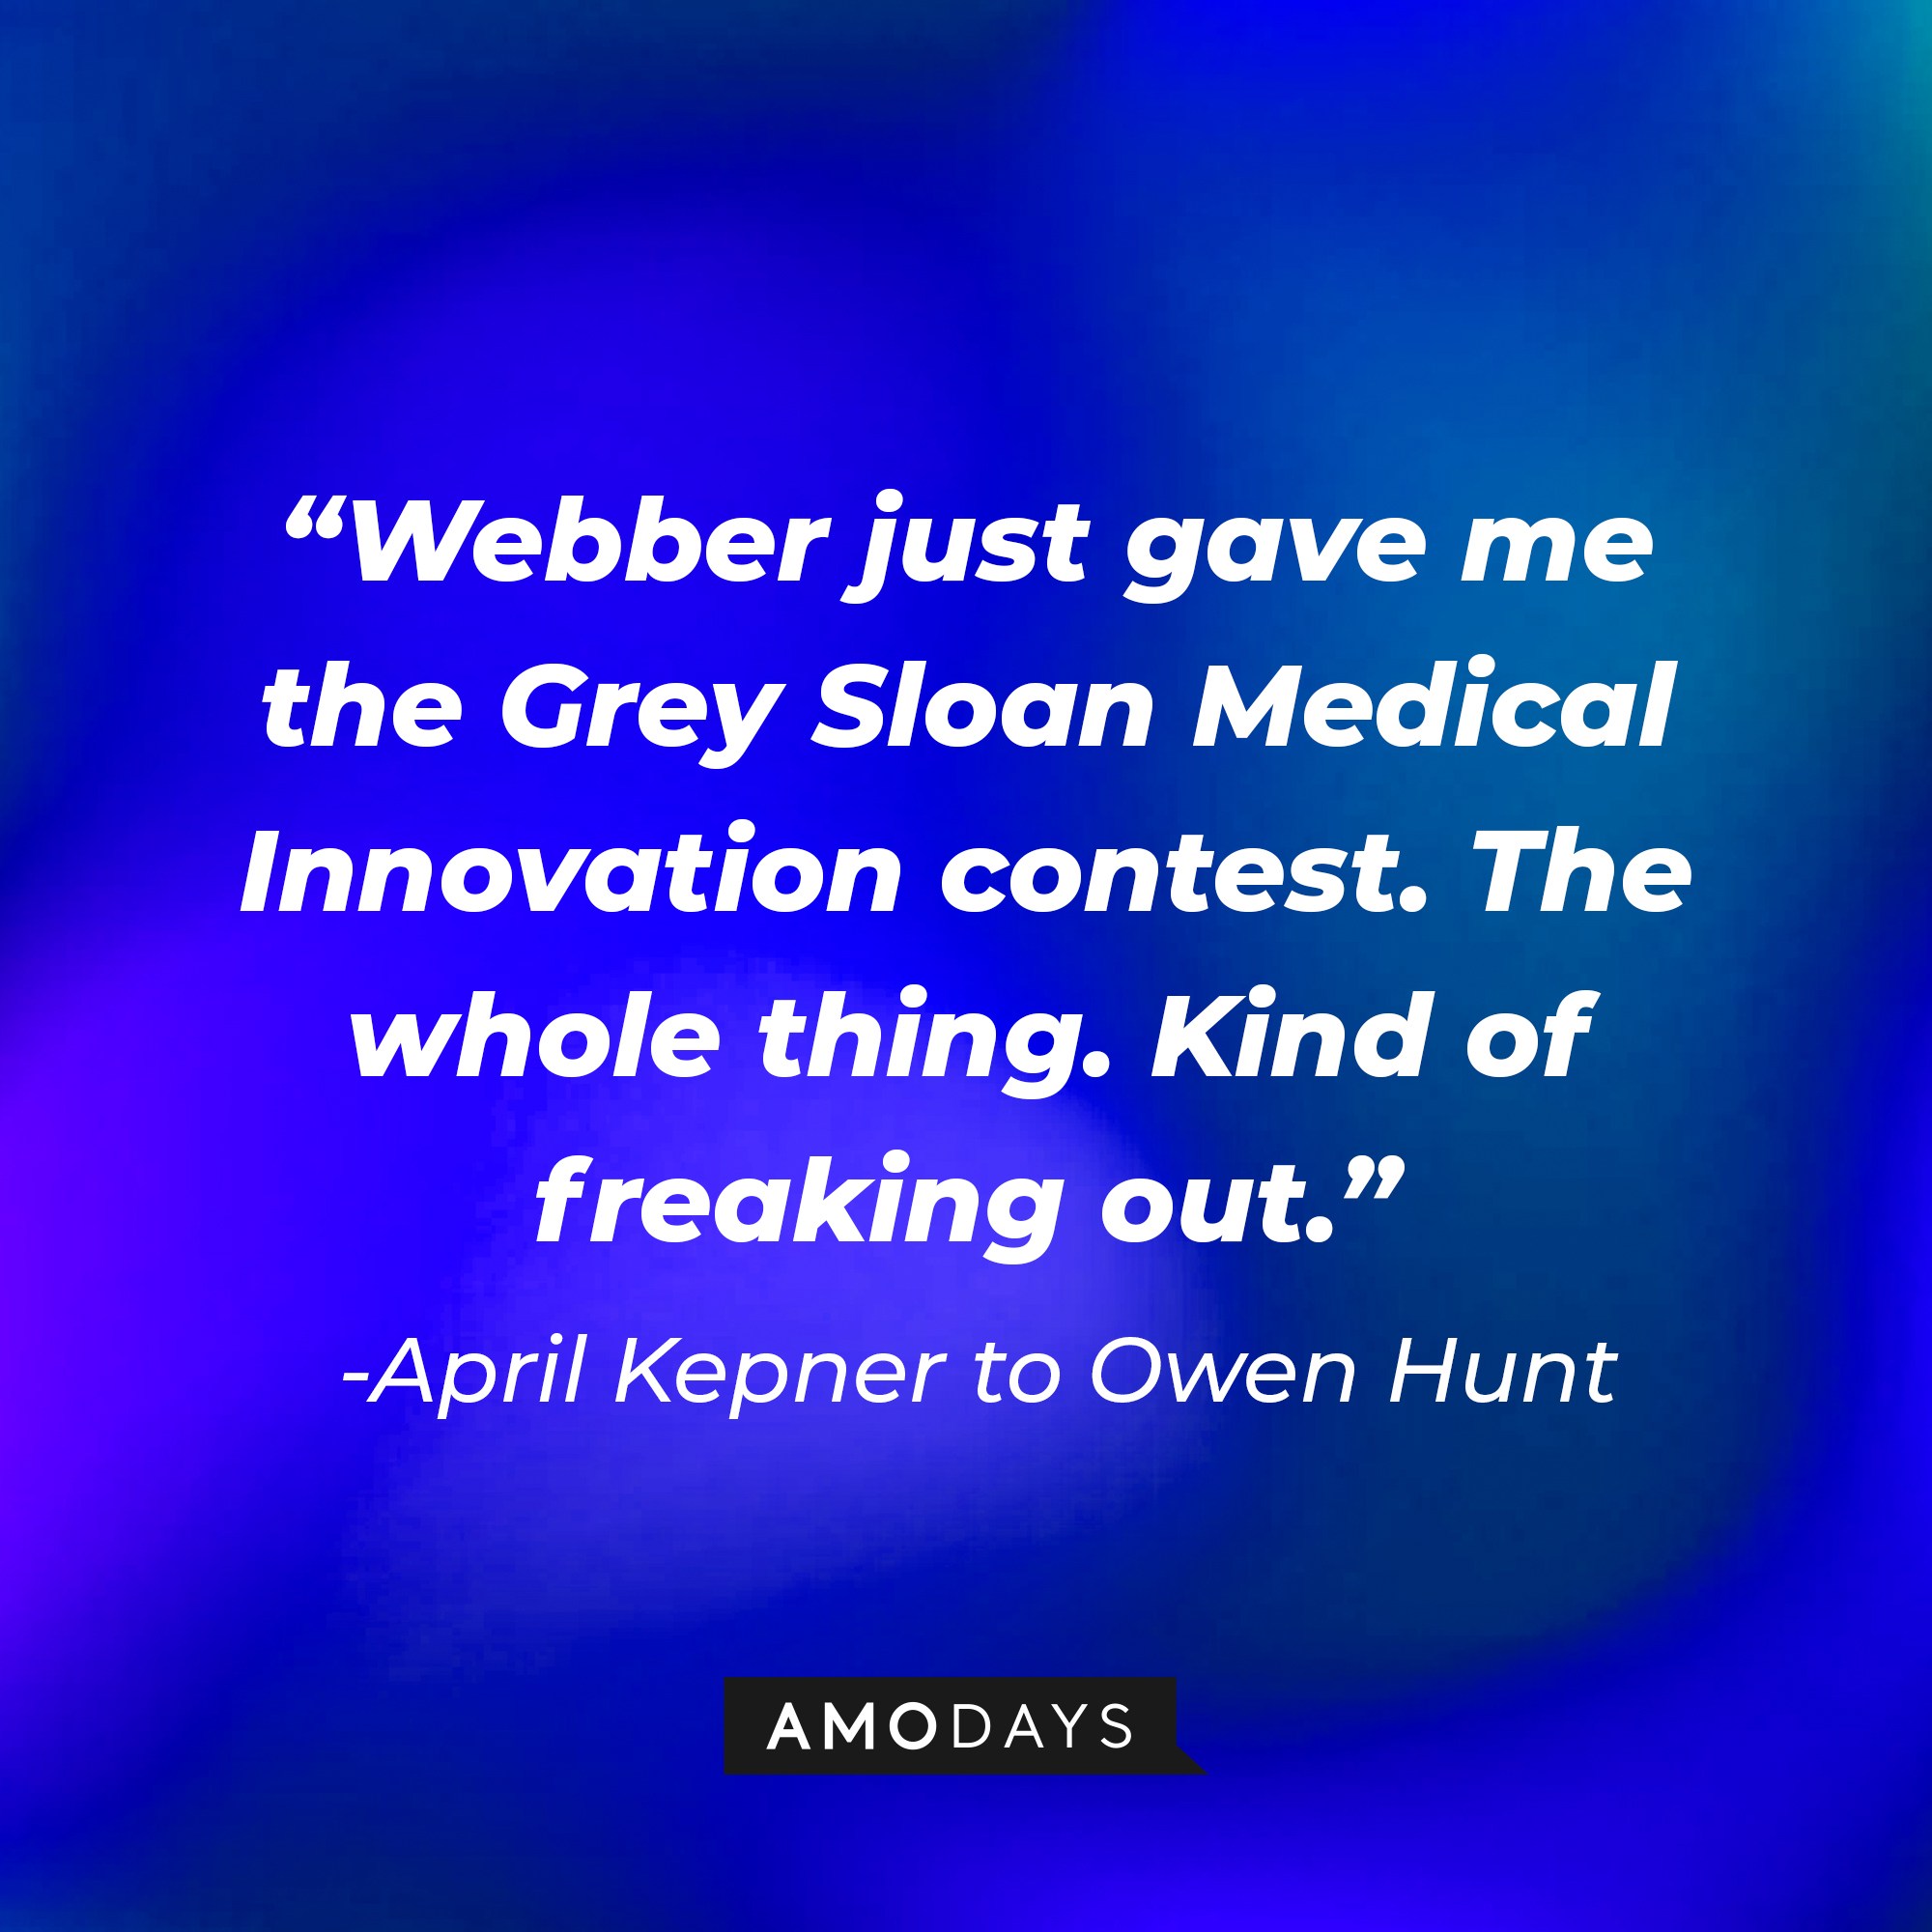 A quote from April Kepner to Owen Hunt: "Webber just gave me the Grey Sloan Medical Innovation contest. The whole thing. Kind of freaking out." | Source: AmoDays